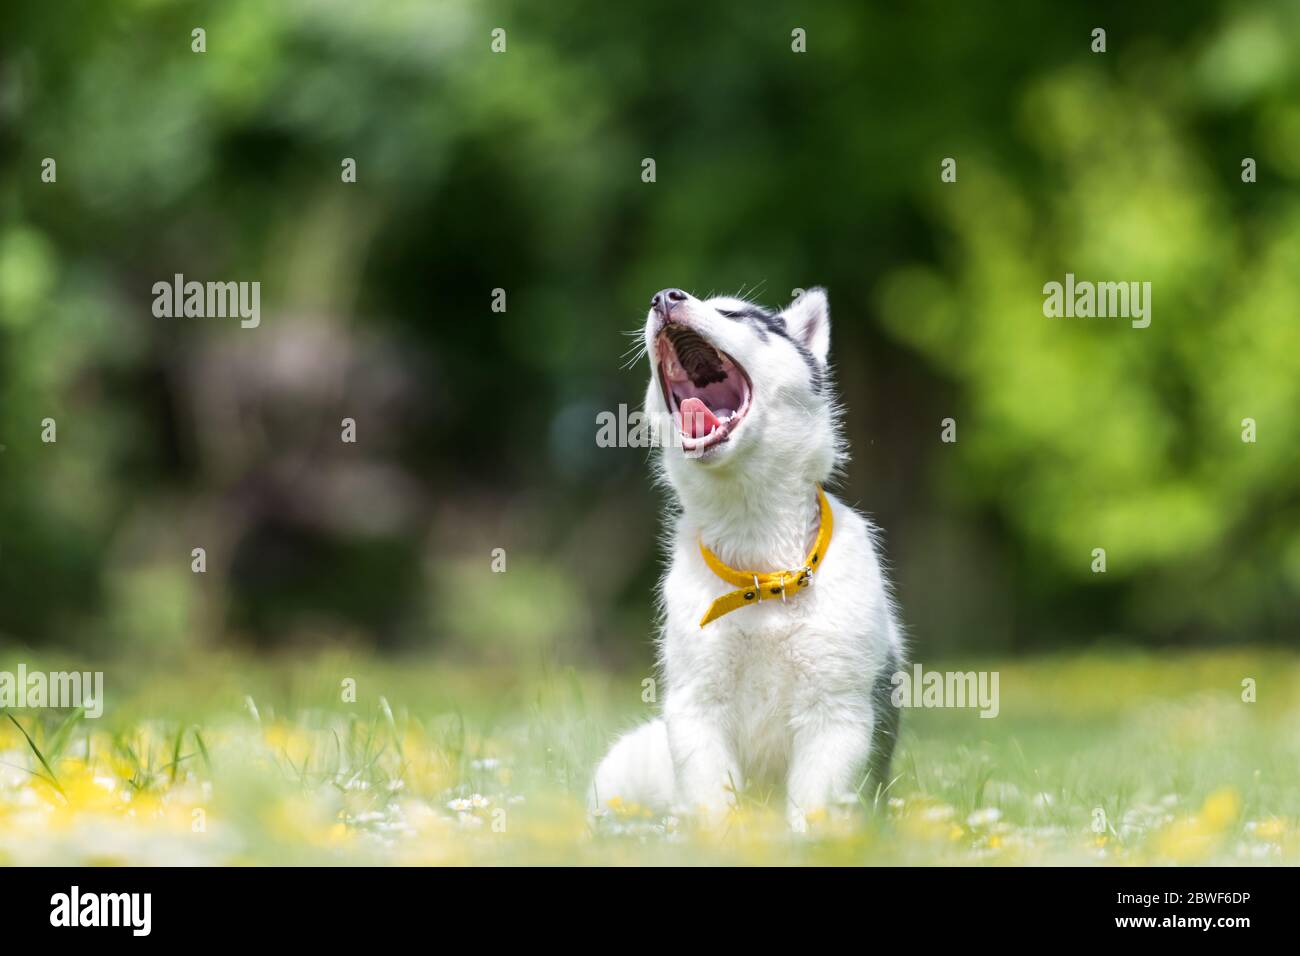 A small white dog puppy breed siberian husky with open mouth in blooming spring garden. Dogs and pet photography Stock Photo